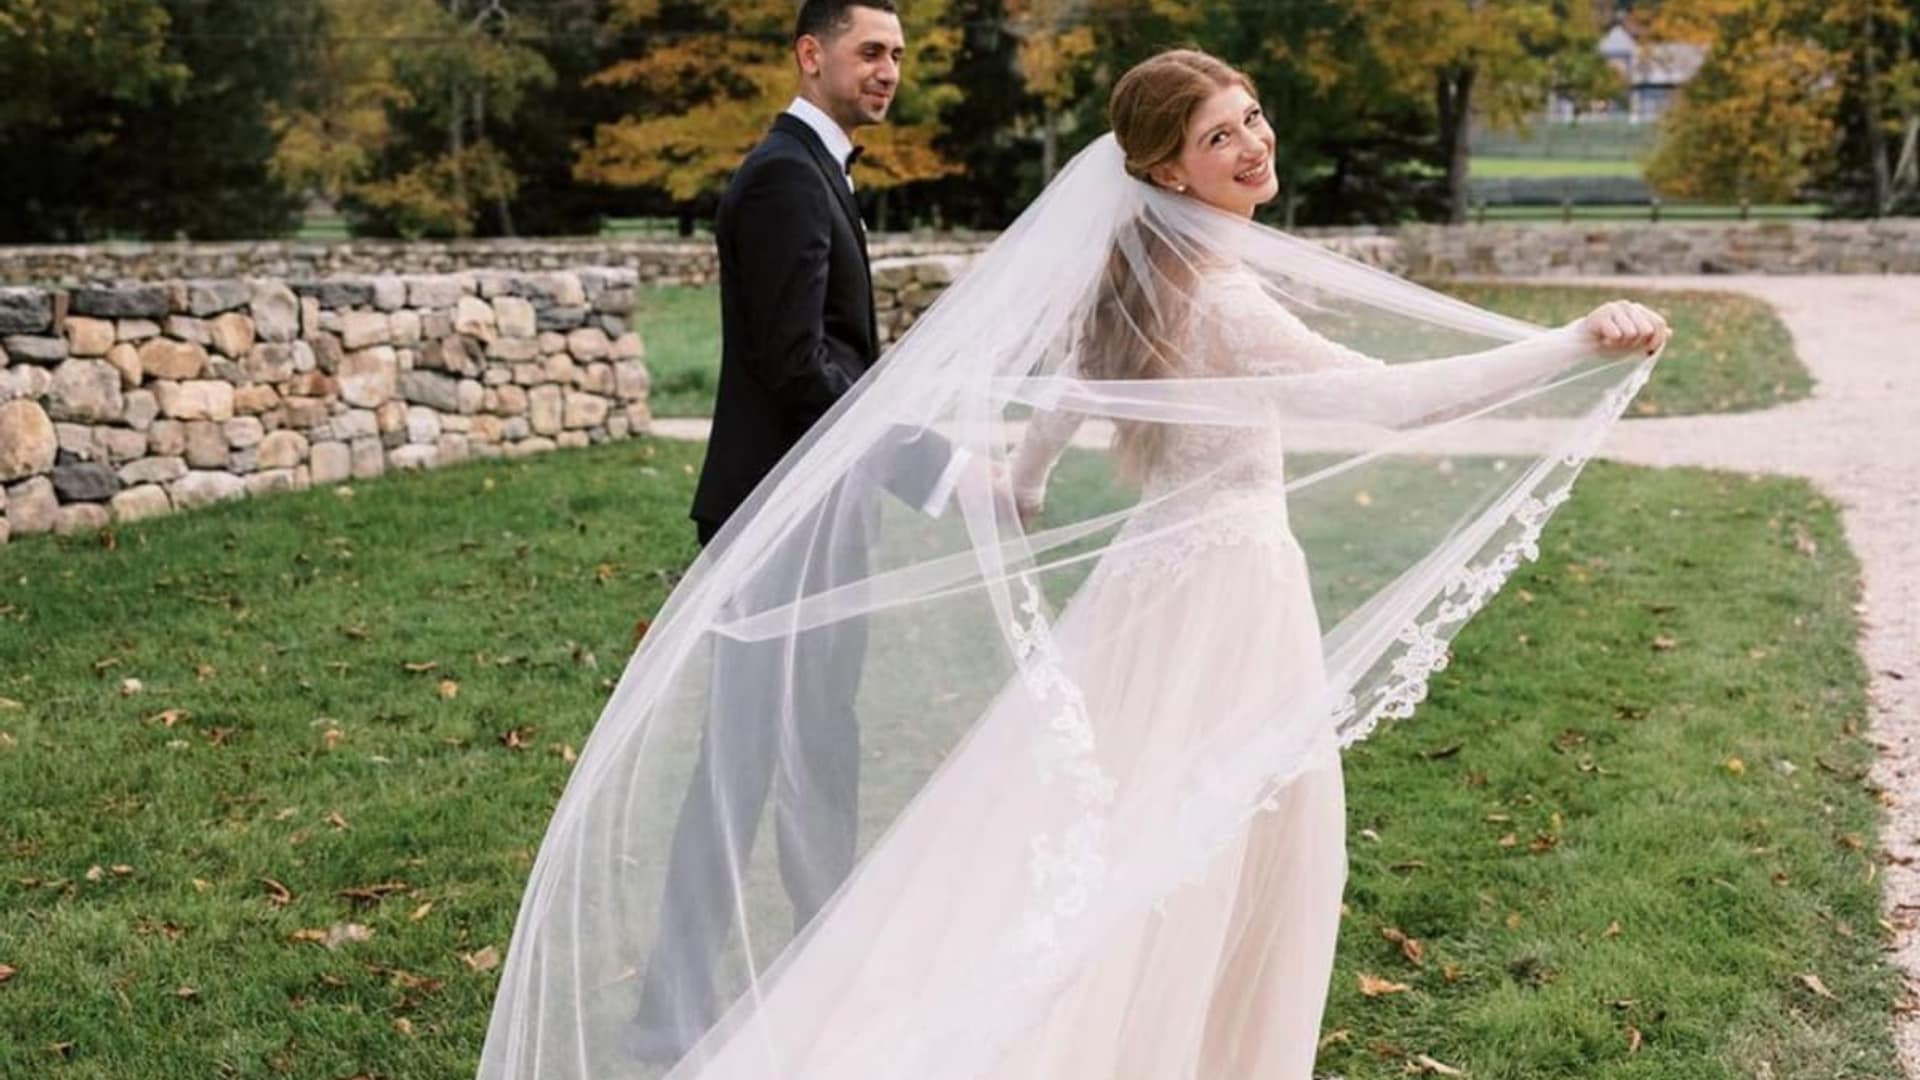 Jennifer Gates married equestrian Nayel Nassar at their Westchester County farm on October 16